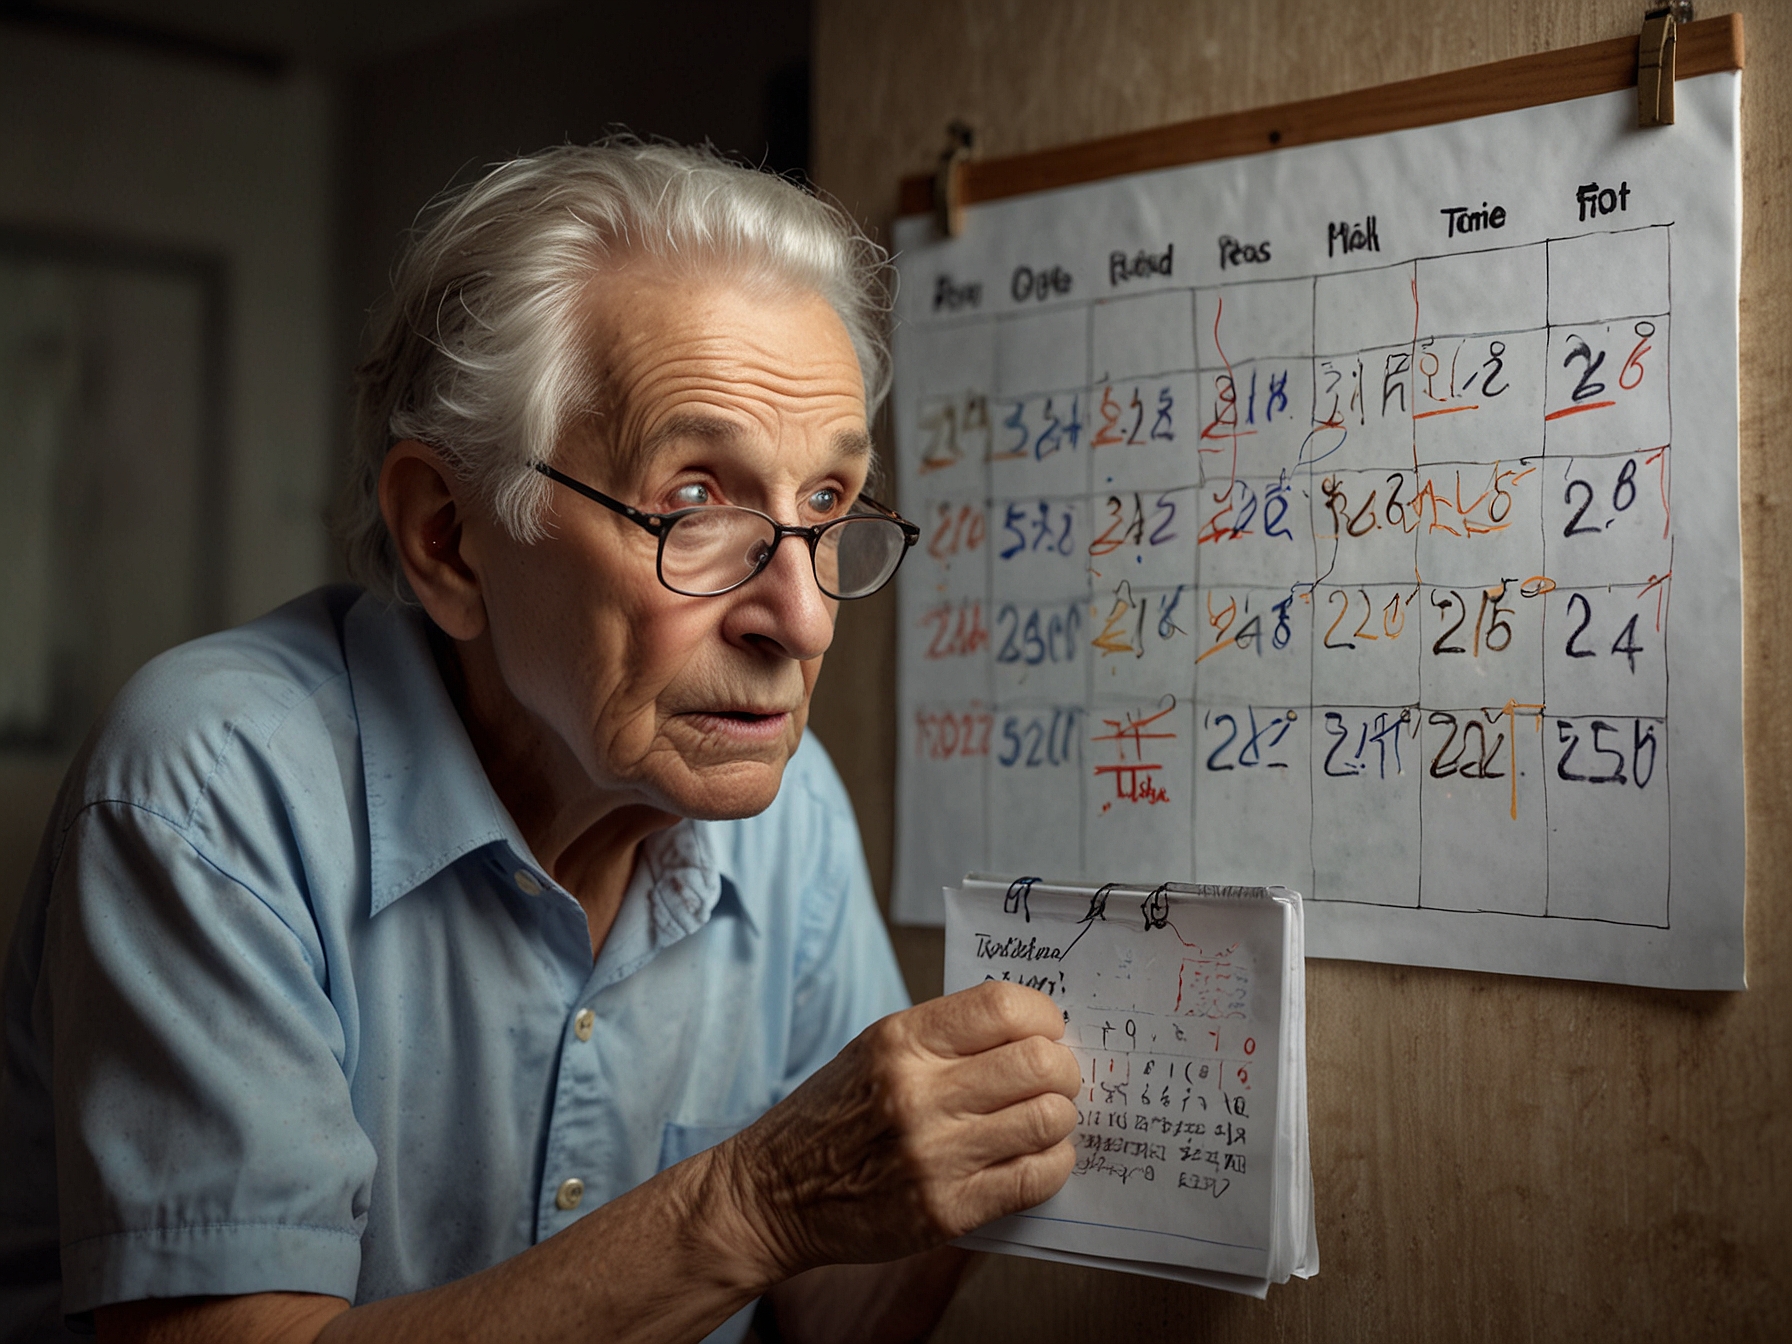 An elderly person looking confused at a calendar, symbolizing the confusion with dates and time—a common symptom of Alzheimer’s disease.